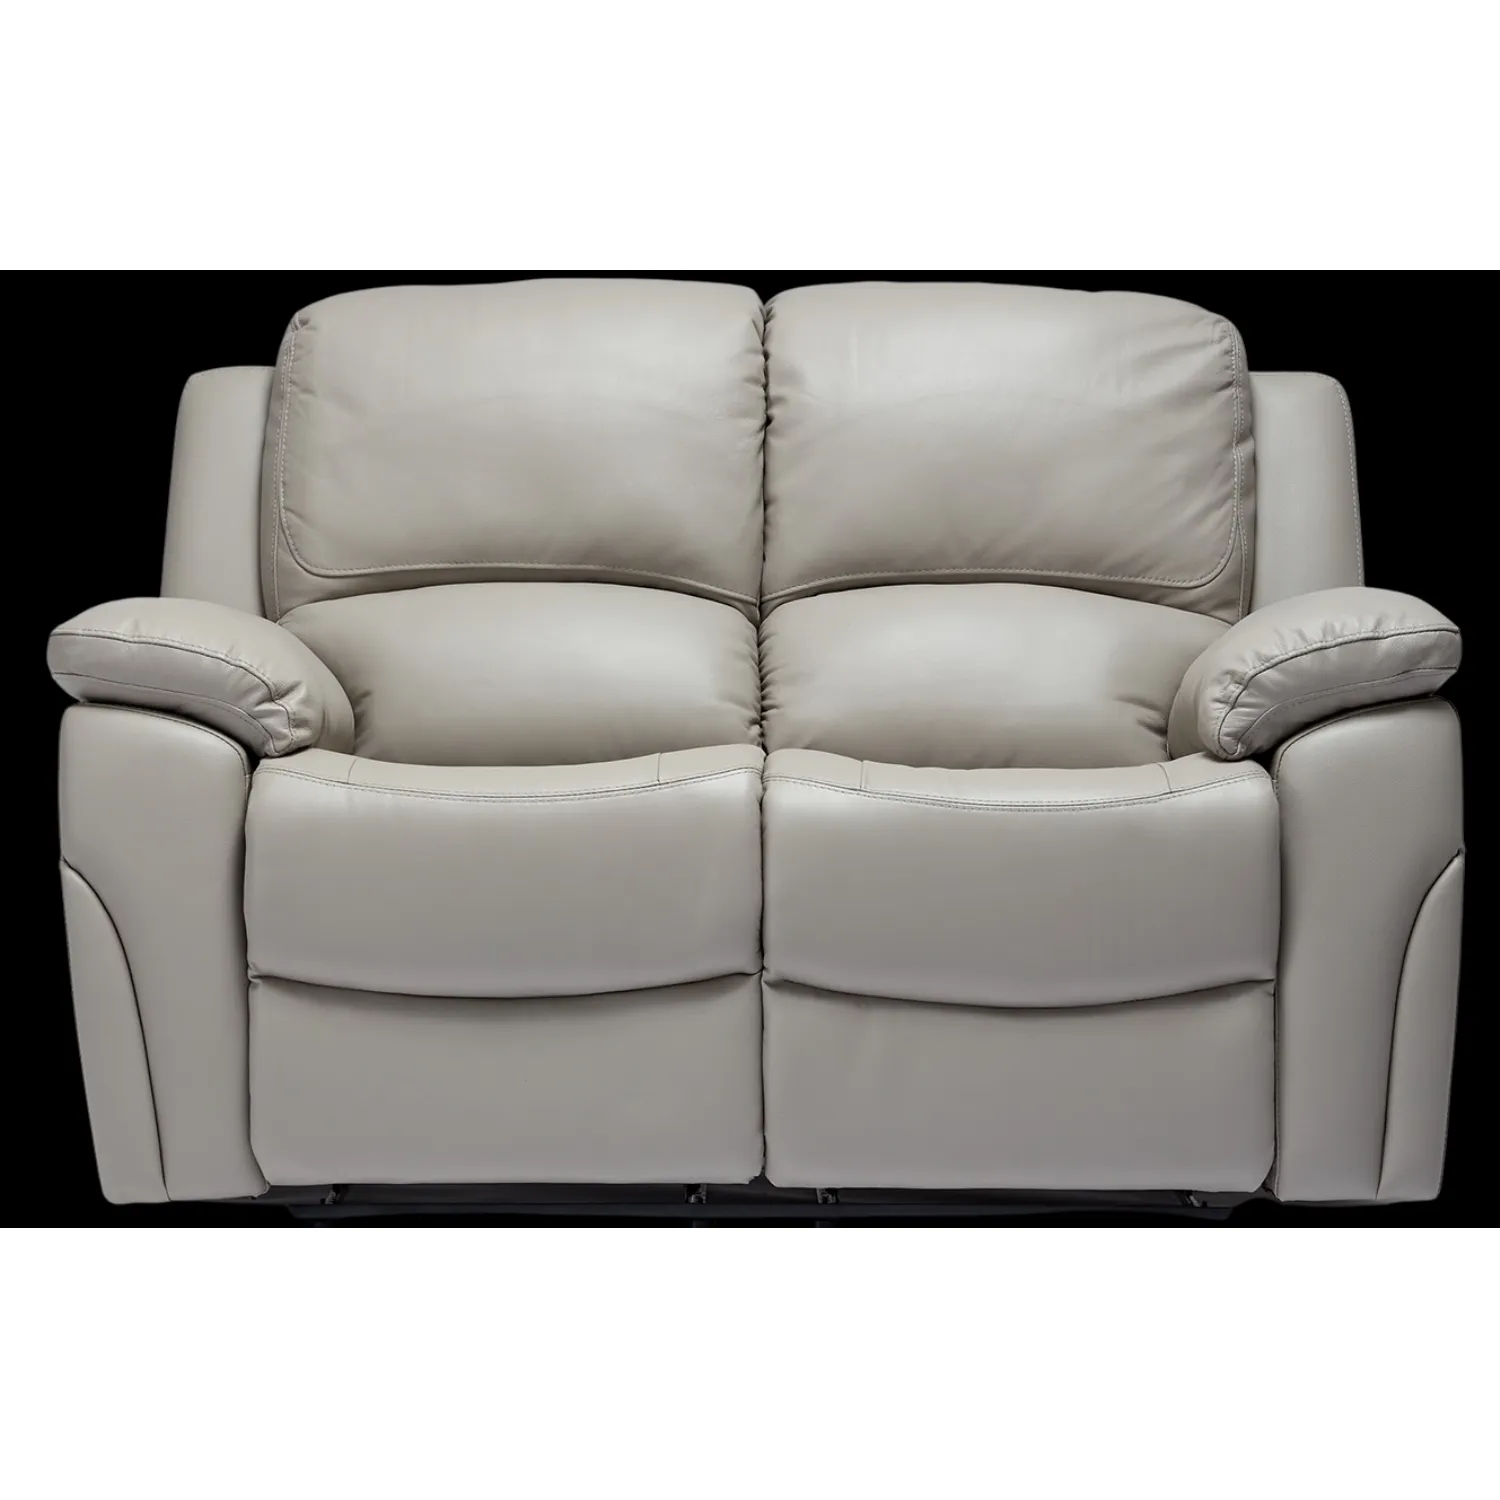 2 Seater Leather Recliner Sofa in Pearl Grey, Black or Sky Blue